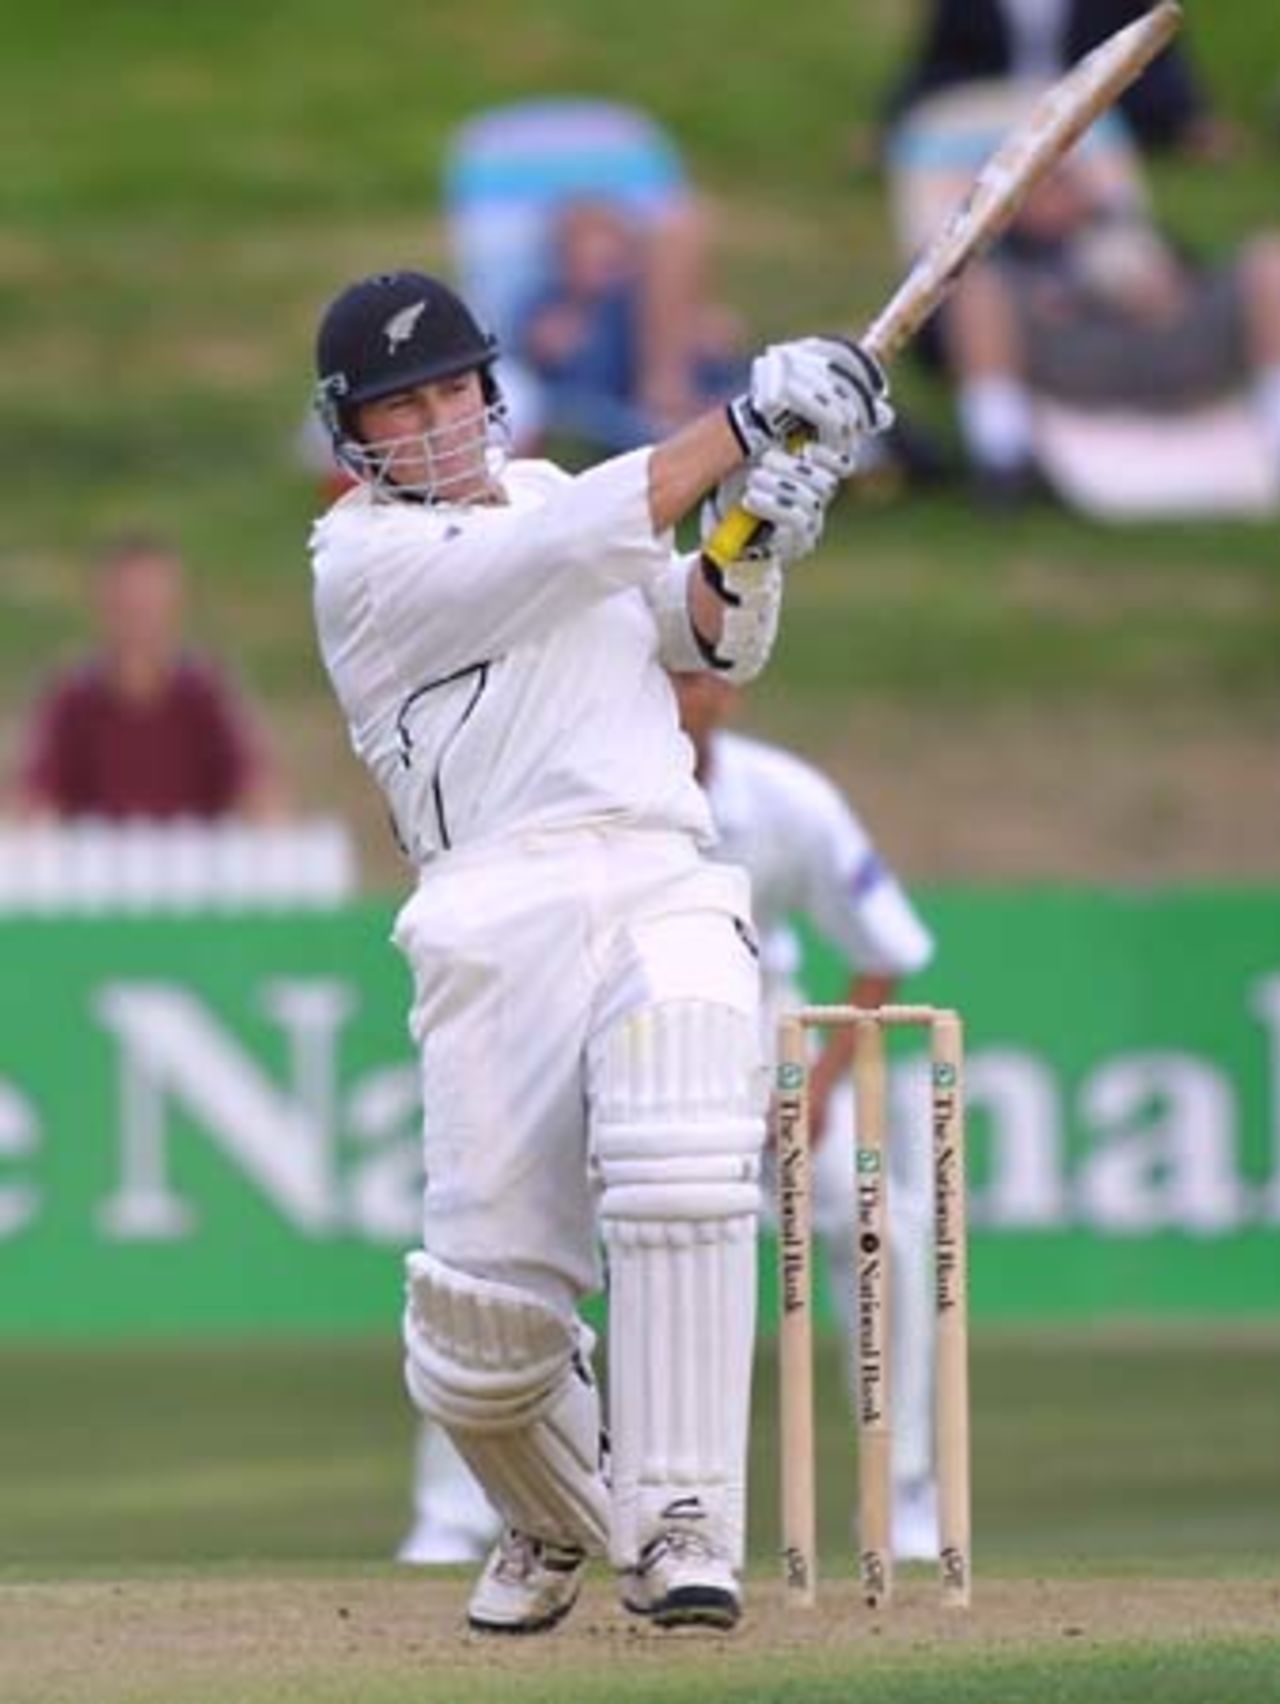 New Zealand opening batsman Matthew Bell pulls a ball to the boundary for four during his first innings. Bell ended the first day's play on 89 not out, his highest Test score. 3rd Test: New Zealand v Pakistan at WestpacTrust Park, Hamilton, 27-31 March 2001 (Day 1).